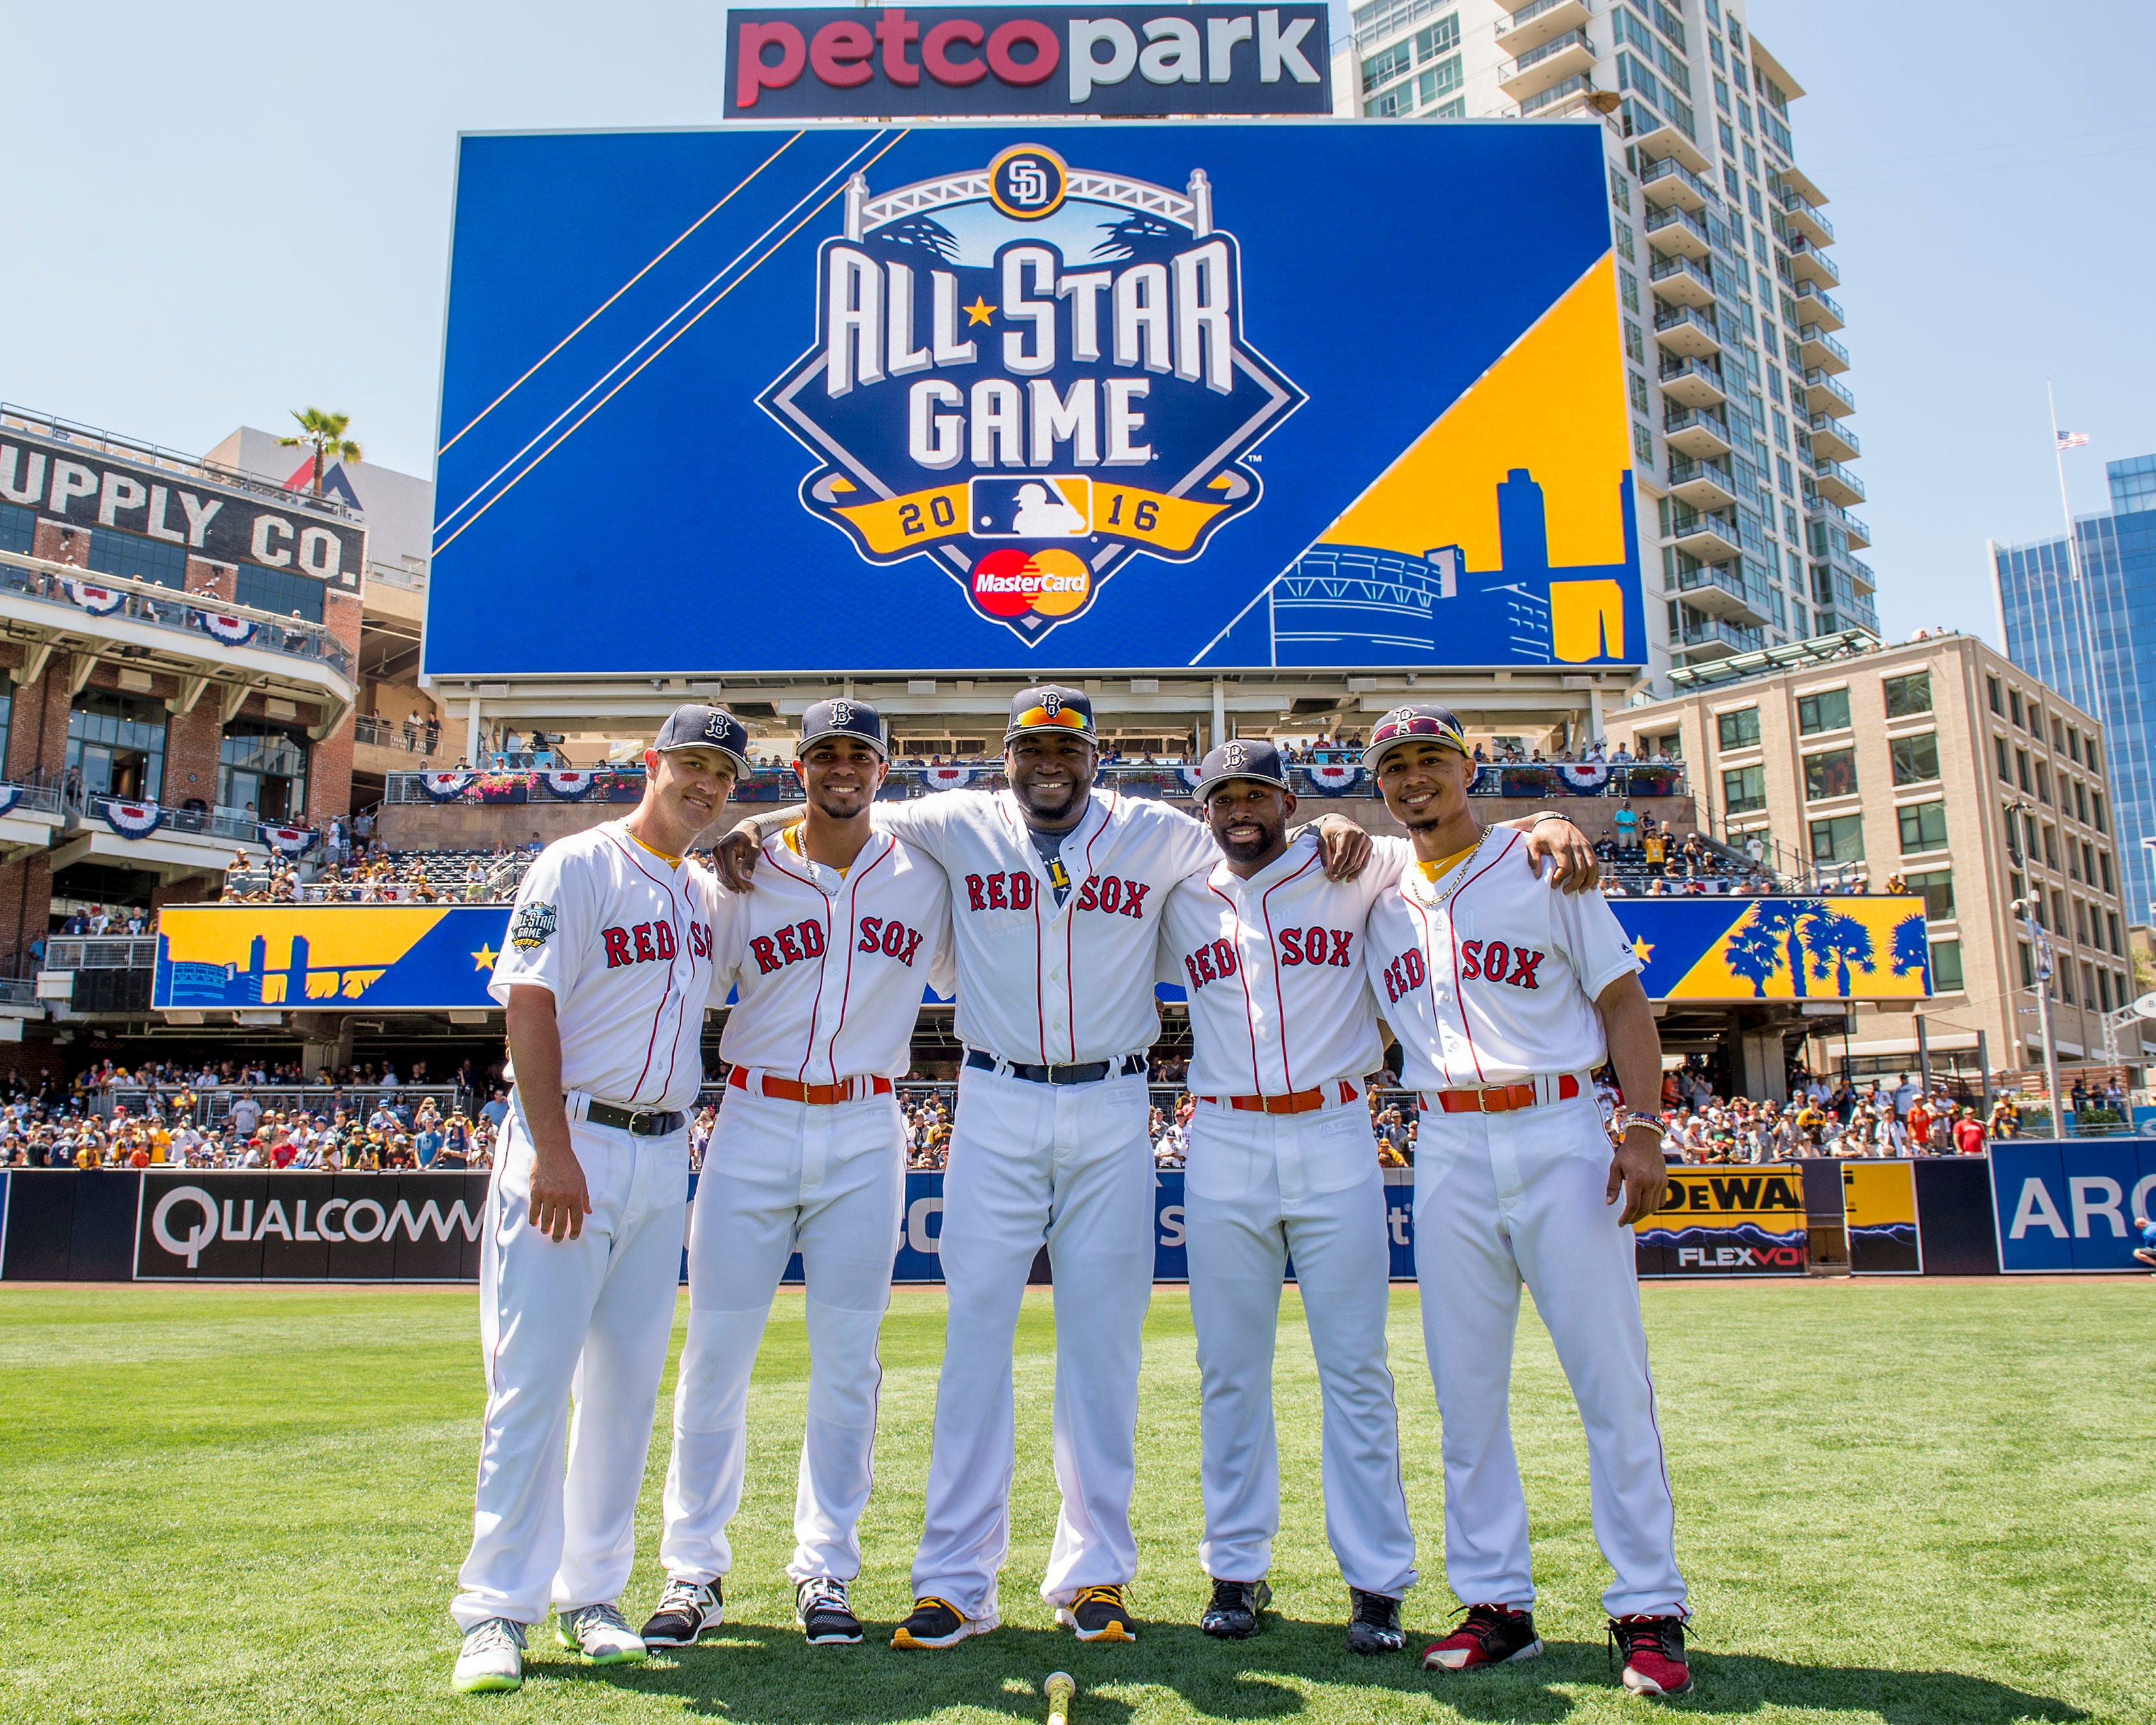 Red Sox Shine In 2016 All-Star Game, by MLB.com/blogs